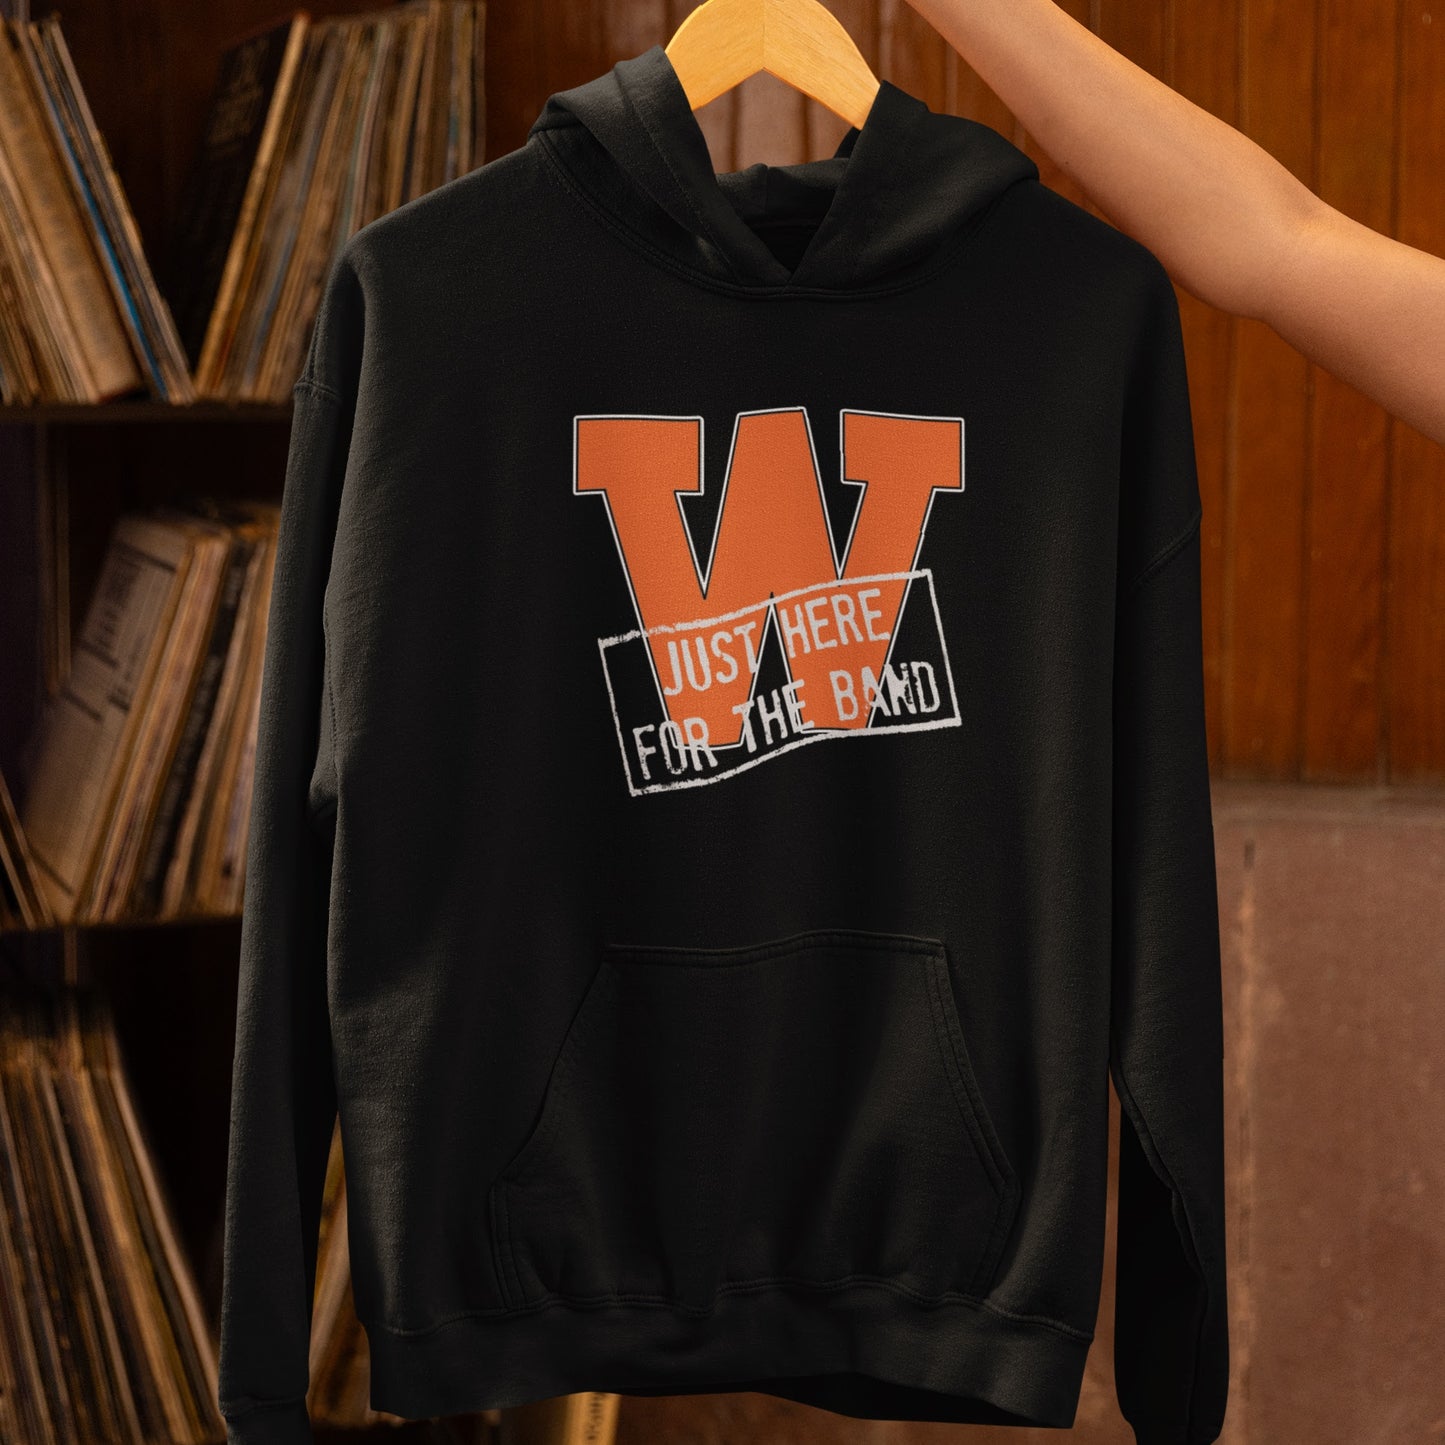 West De Pere - Just Here for the Band Merch - Tee, Long Sleeved Tee, Hoodie, or Crewneck